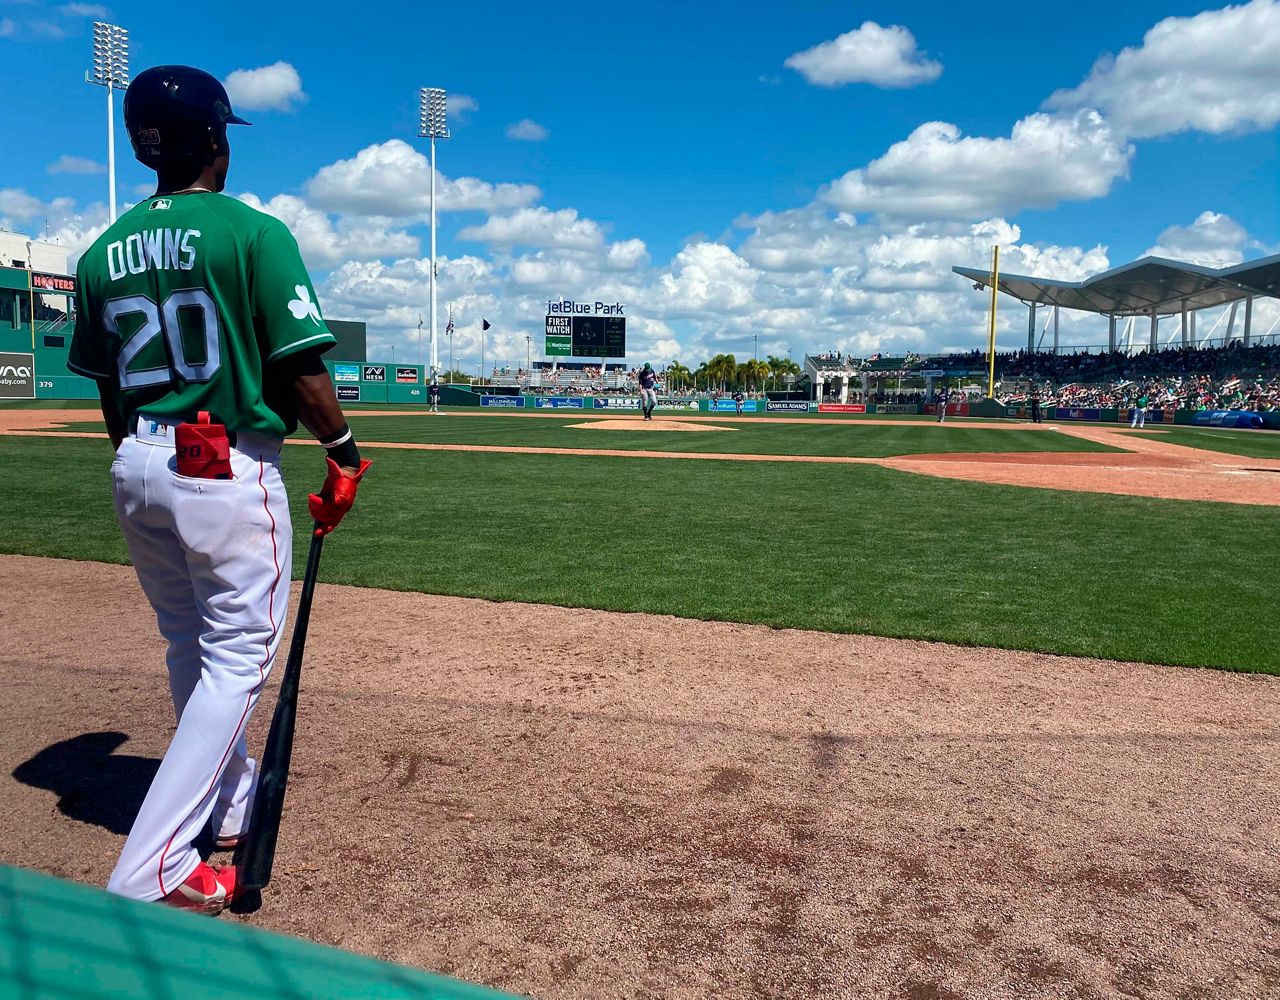 Boston Red Sox Spring Training in Fort Myers